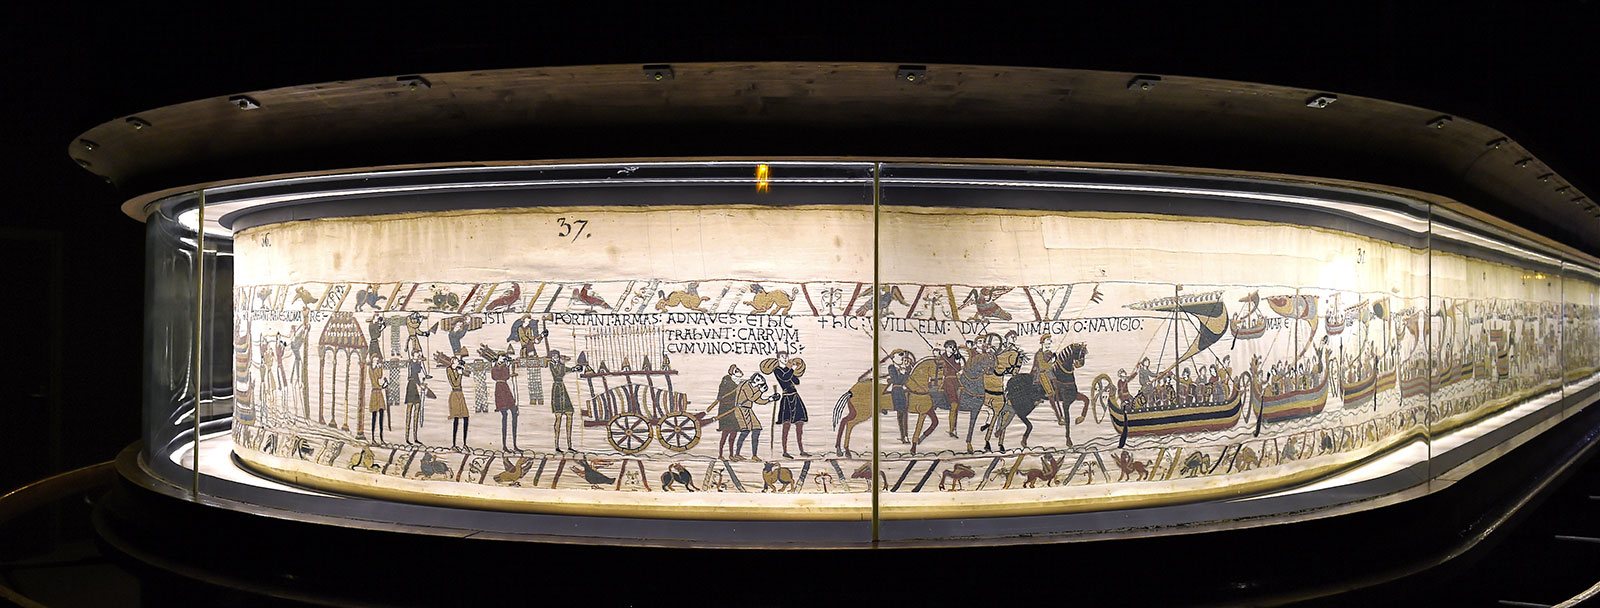 tapisserie bayeux